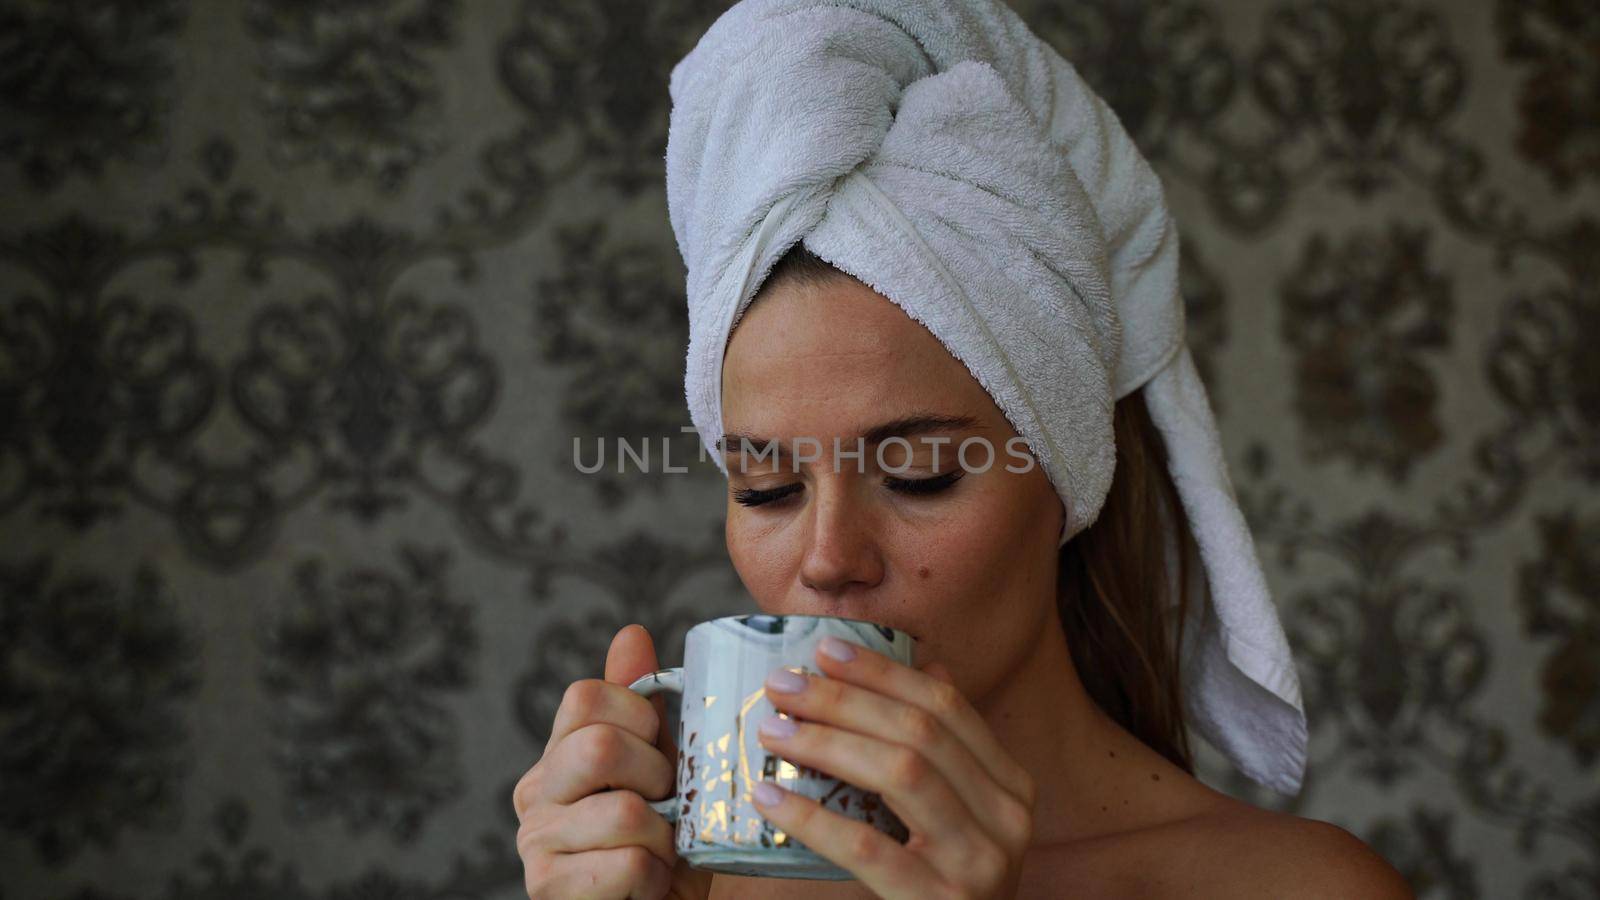 Middle-aged woman looks good with bare shoulders in a white towel on her head holds a cup and drinks coffee or tea against the wall.